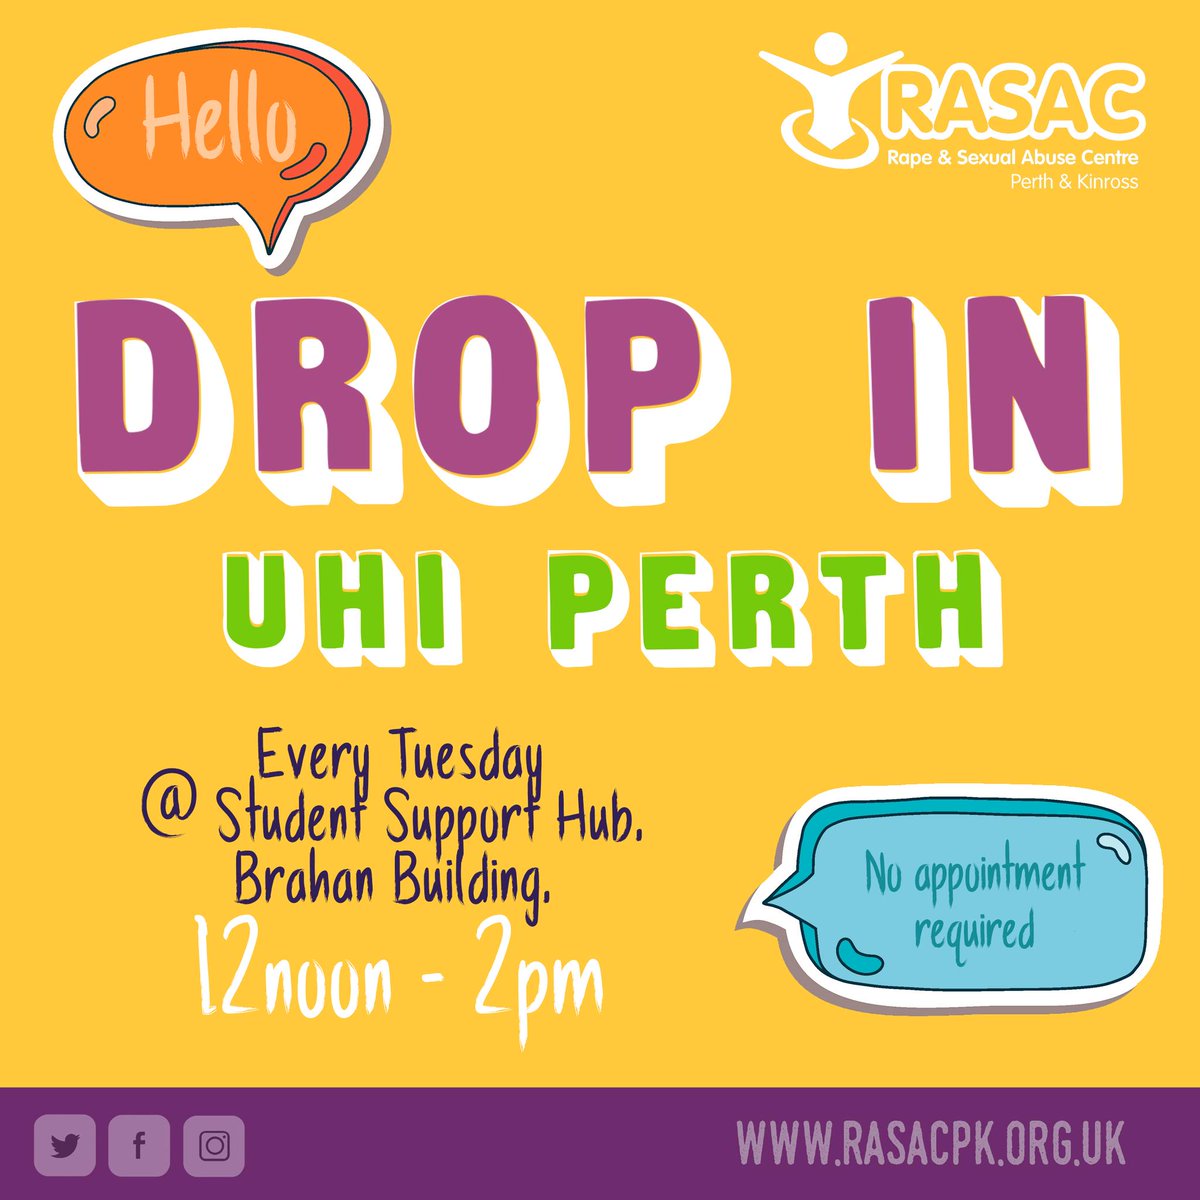 .@rasacpk are back with their weekly Drop Ins at UHI Perth 👇 📅Every Tuesday 📍Student Support Hub, Brahan Building, UHI Perth⏰12noon - 2pm 💜No Appointment required 💜Find out what they do 💜Meet a Support Worker We #ListenBelieveSupport #ibelieveyou #itsnotok #consent